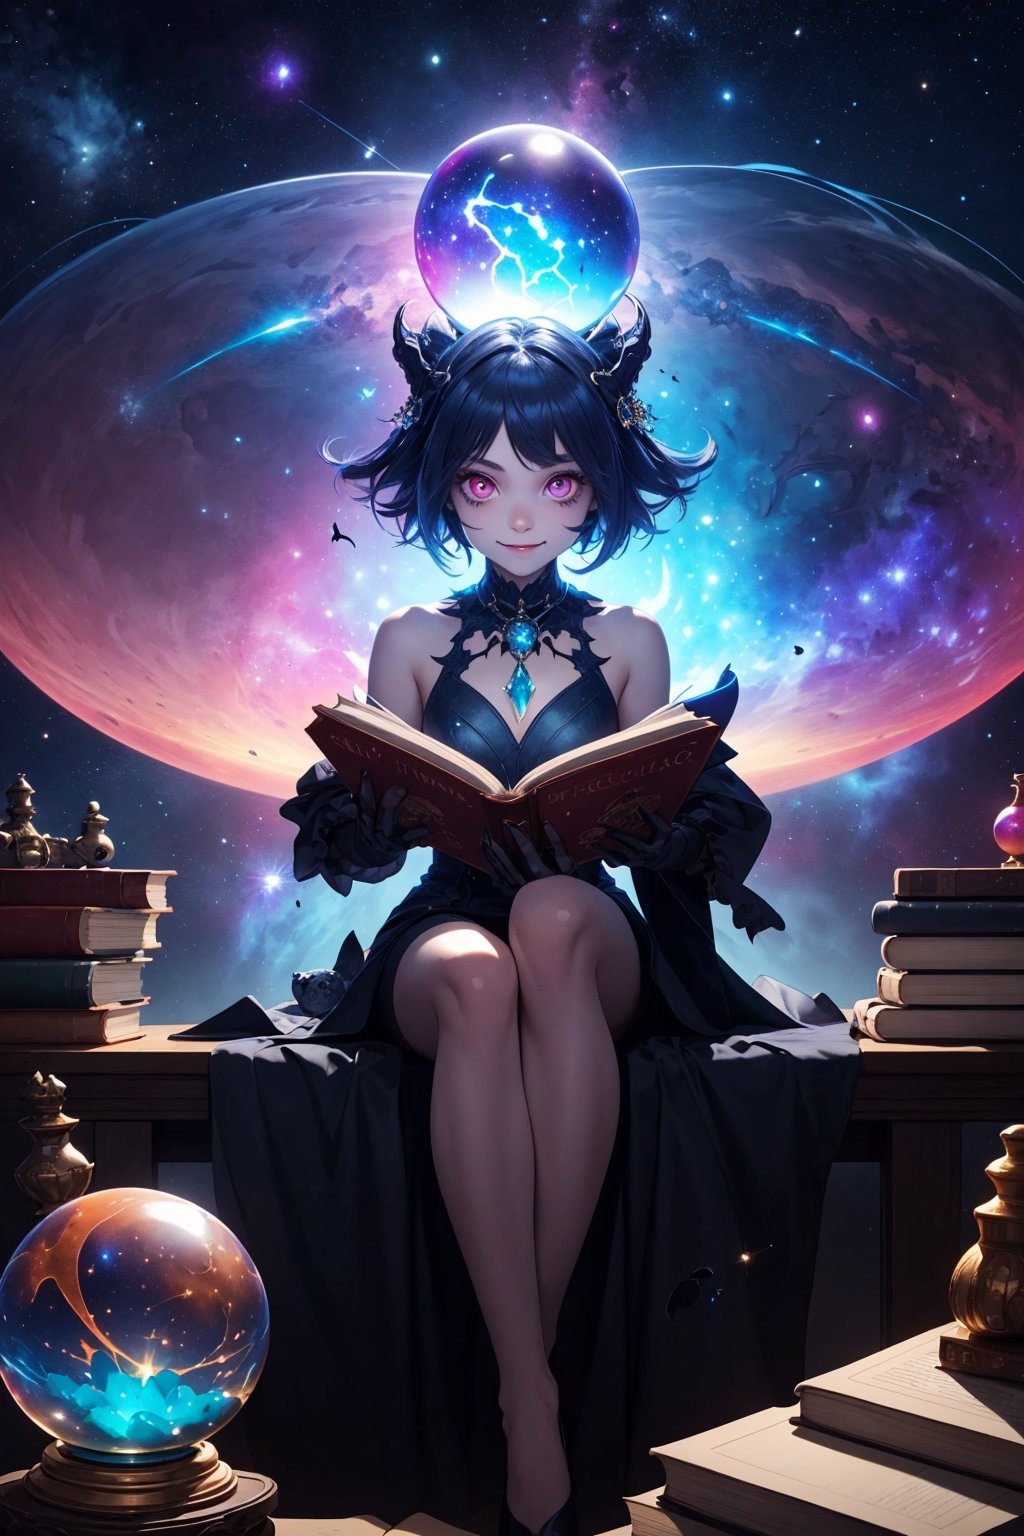 1girl, holding a crystal glass ball that encasing a whole nebula within, study room full of flying book in the background, complex_bg, vibrant color, shining clothes that embracing entire universe, in her shoulder sit a small cute ghoul pet with cherish expression, glowing llight sparkles